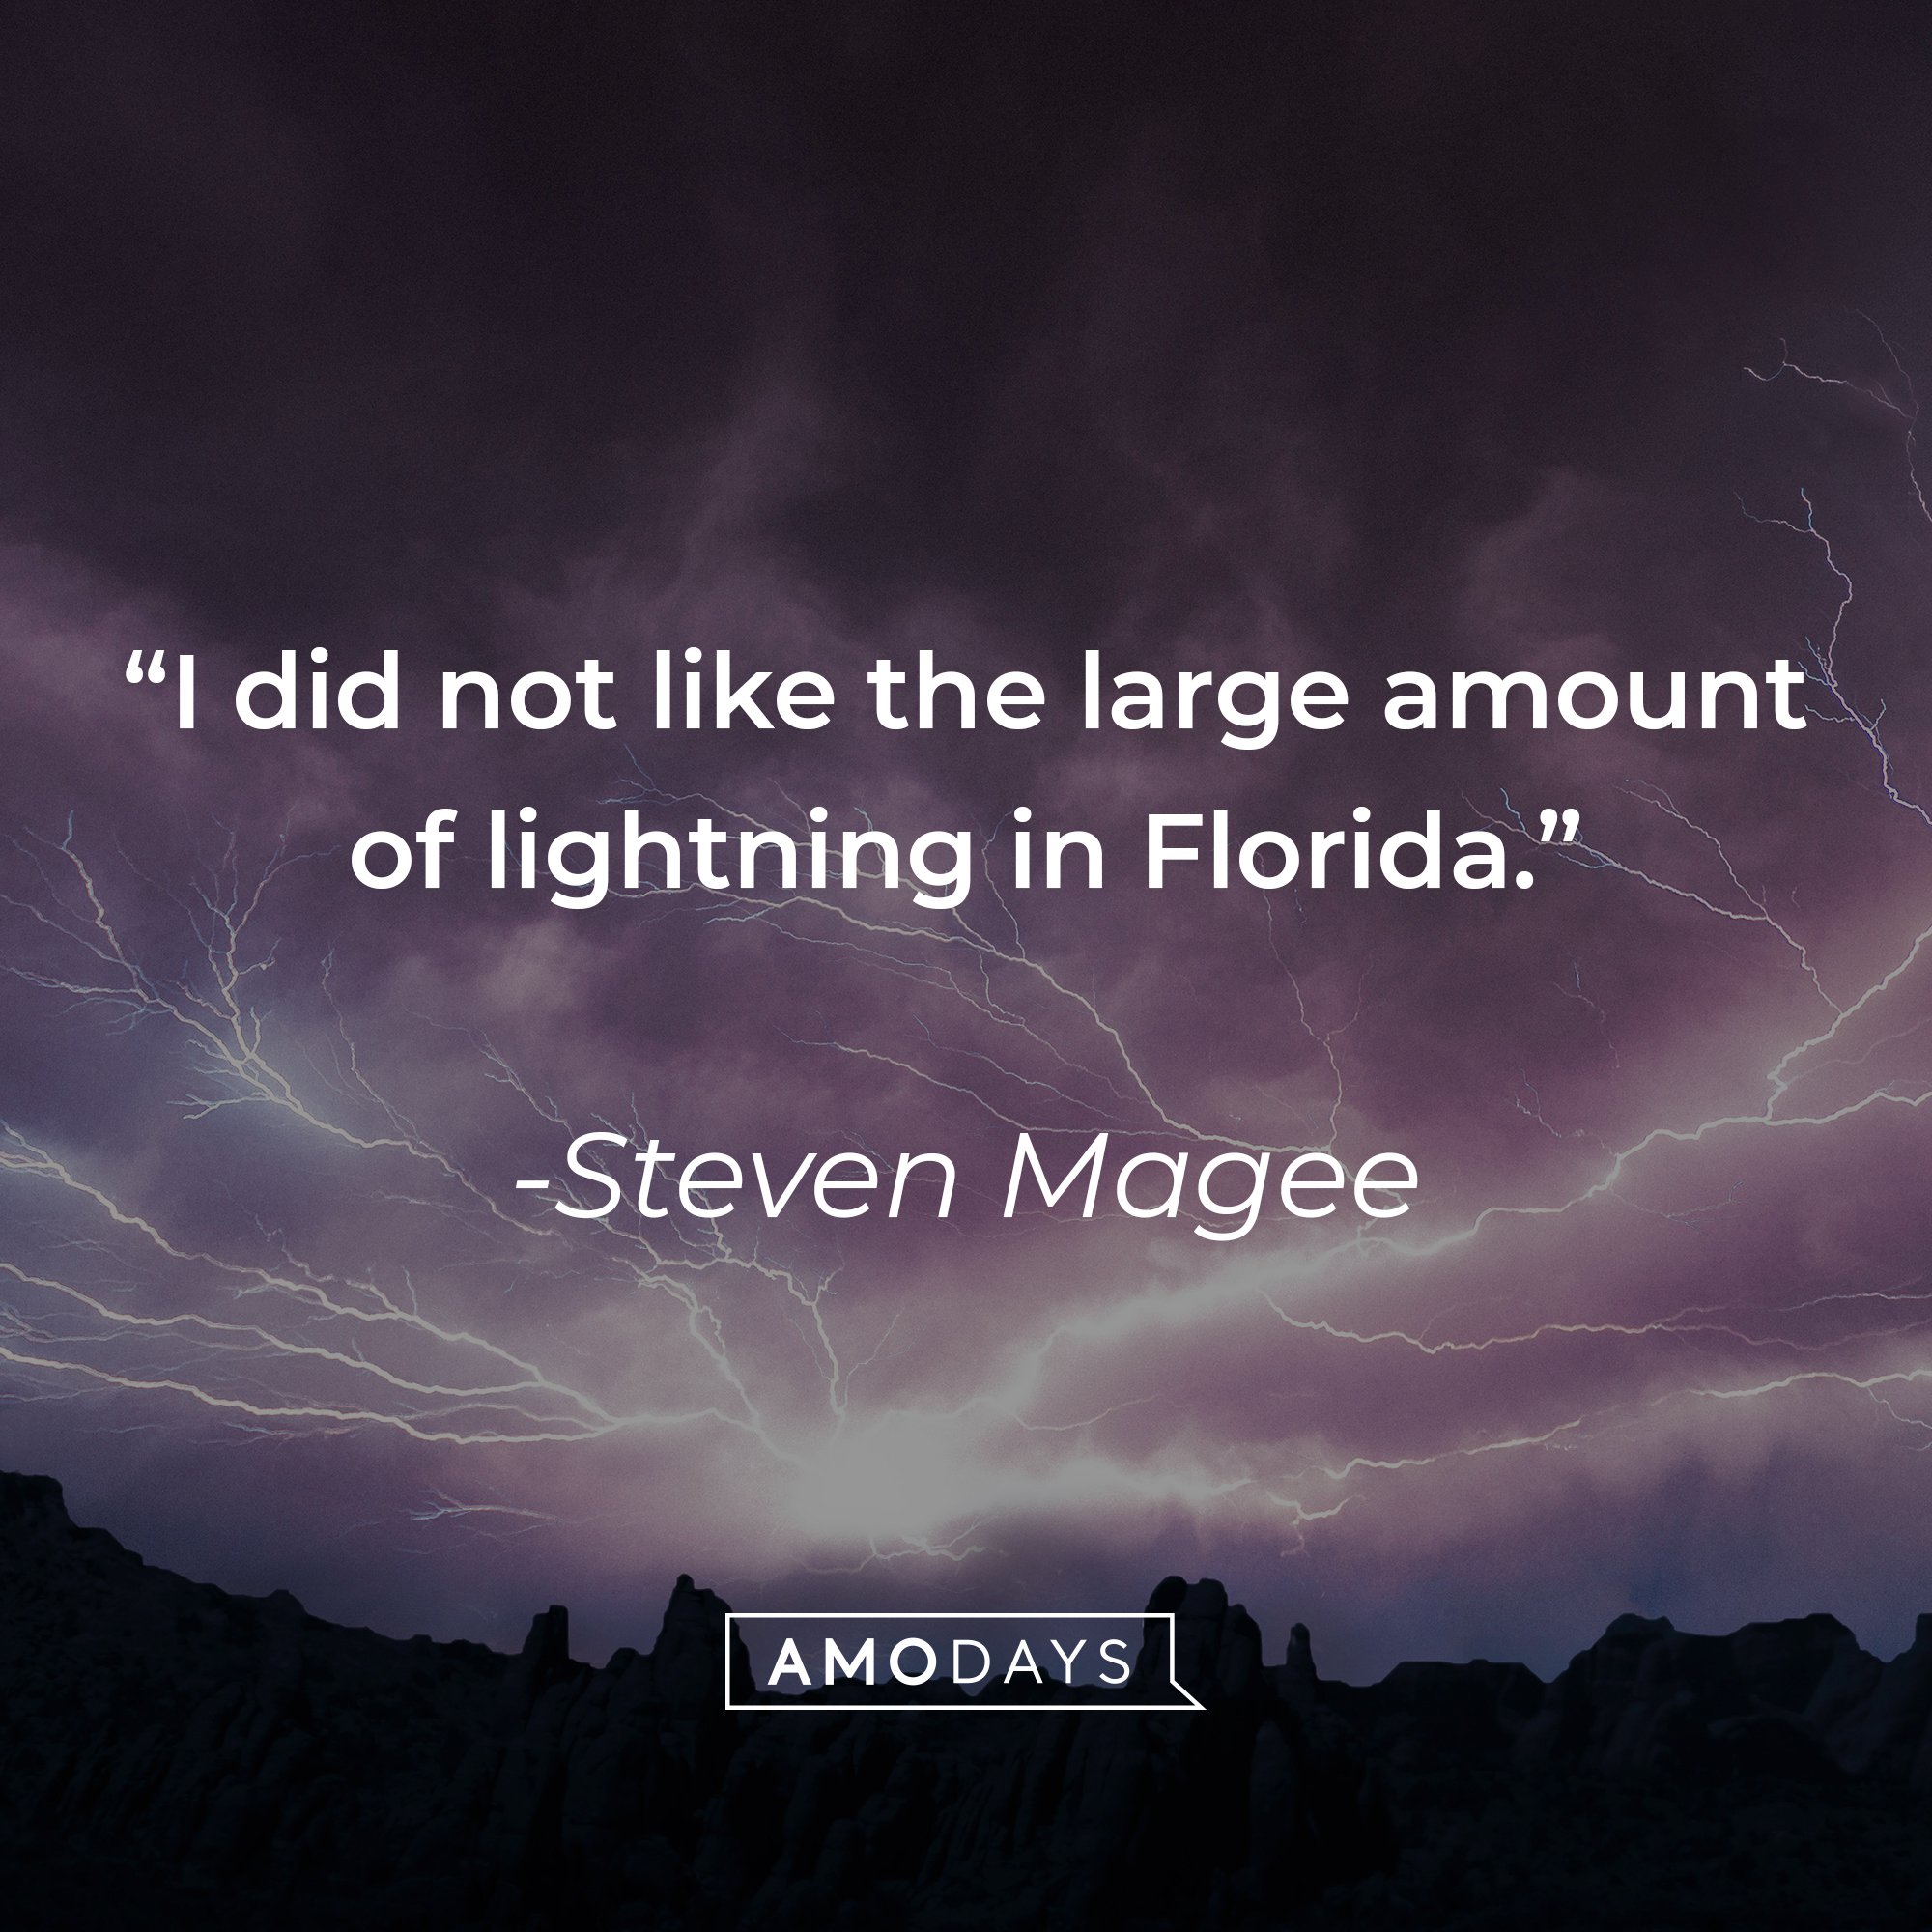 Steven Magee’s quote: "I did not like the large amount of lightning in Florida." | Image: AmoDays 